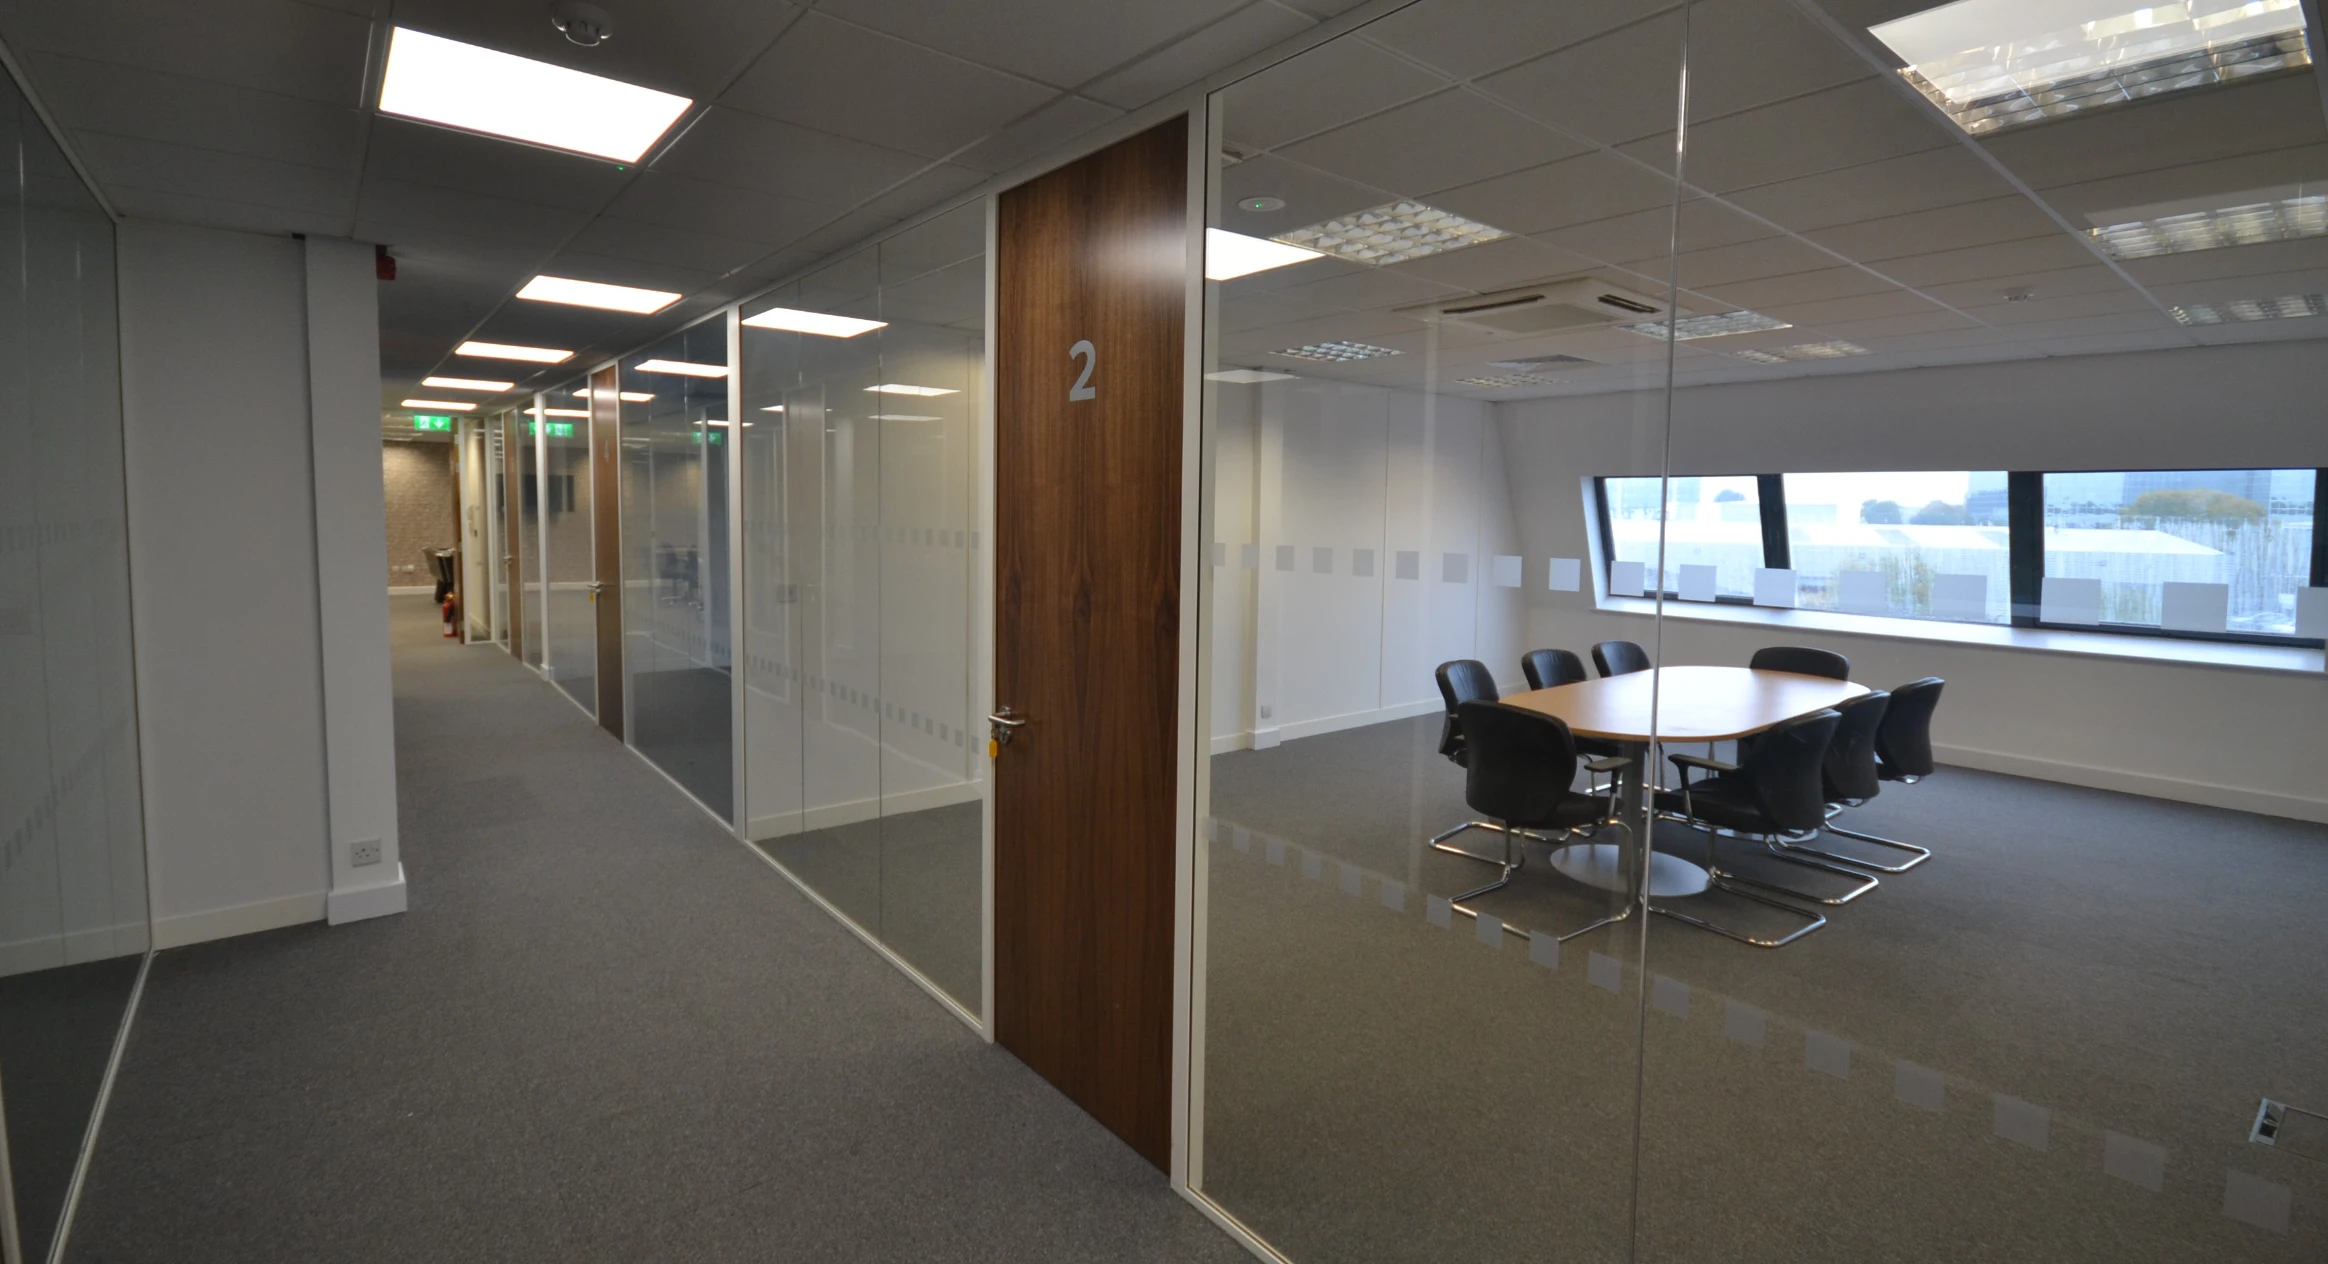 Commercial partition walls | glass partitions in hallway with wooden table at the end. Pot and plant on the table.